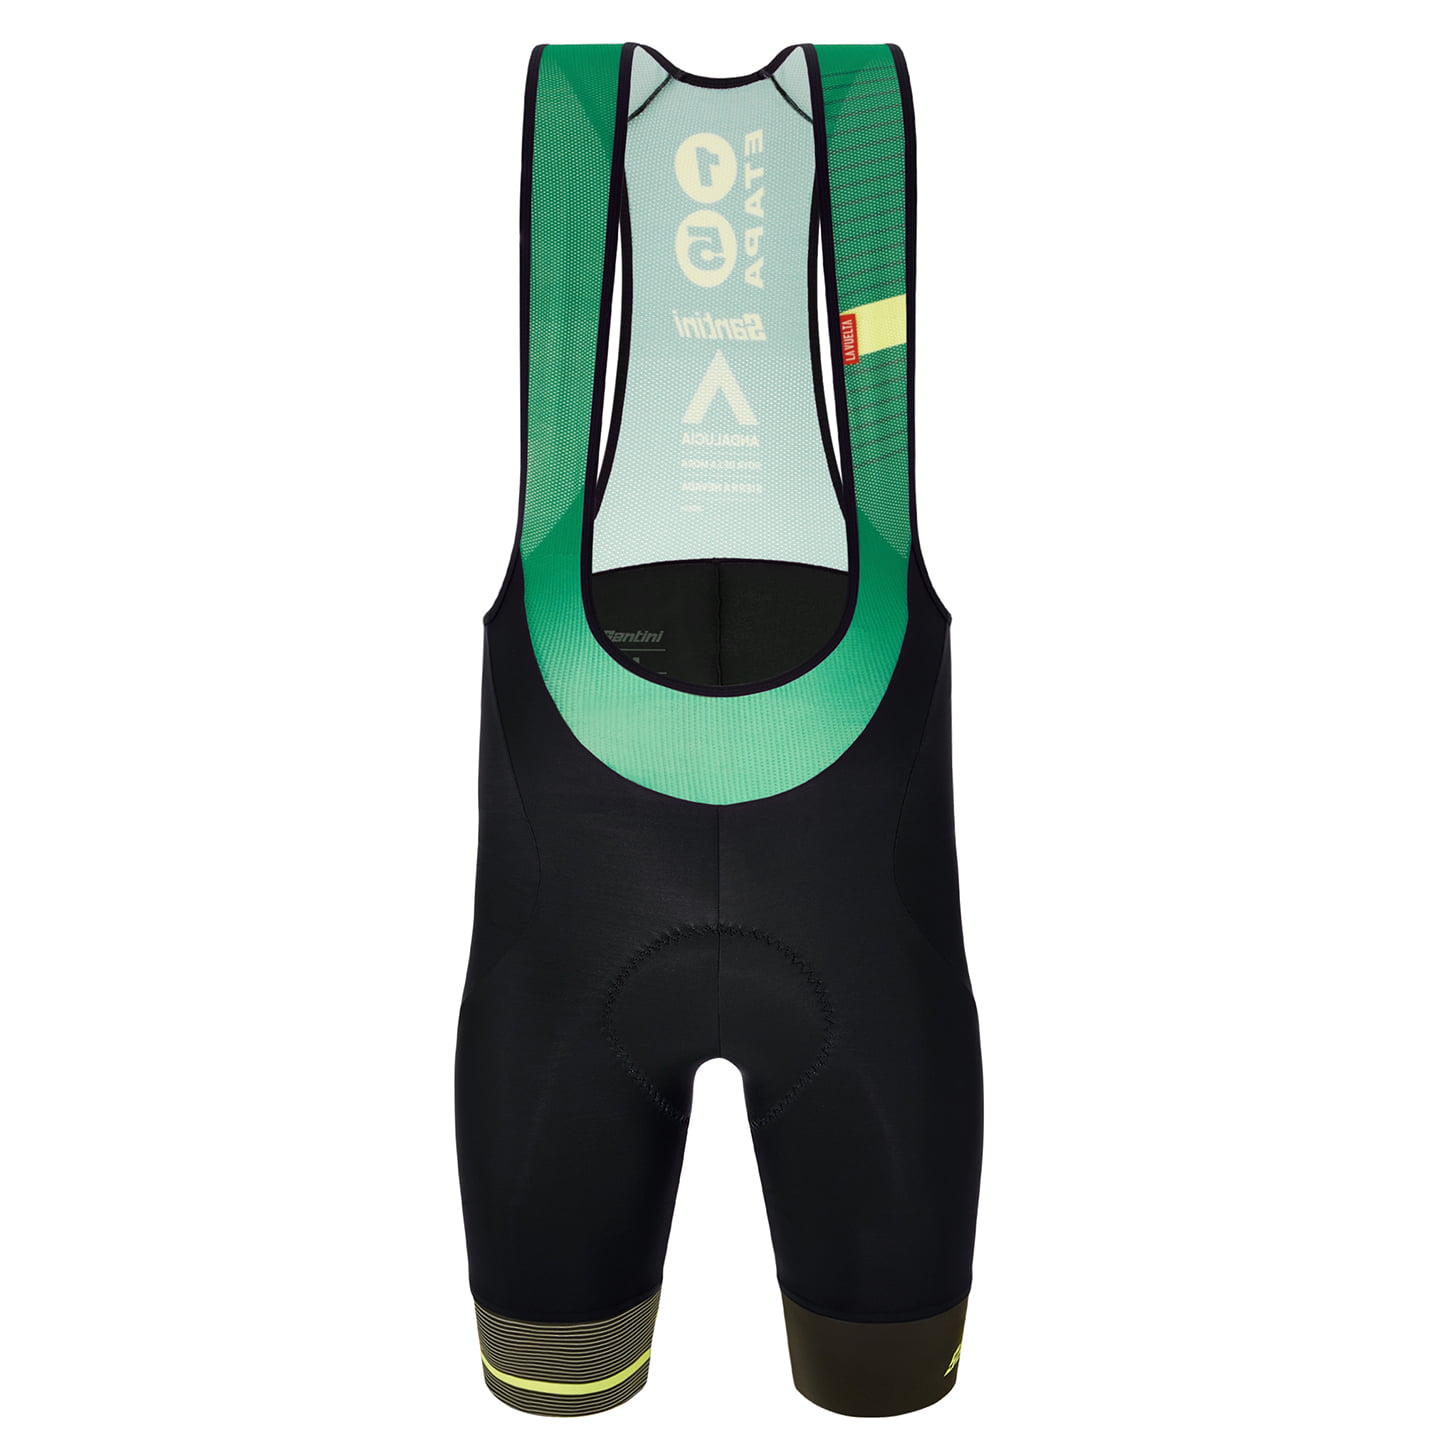 LA VUELTA Sierra Nevada 2022 Bib Shorts, for men, size XL, Cycle trousers, Cycle clothing